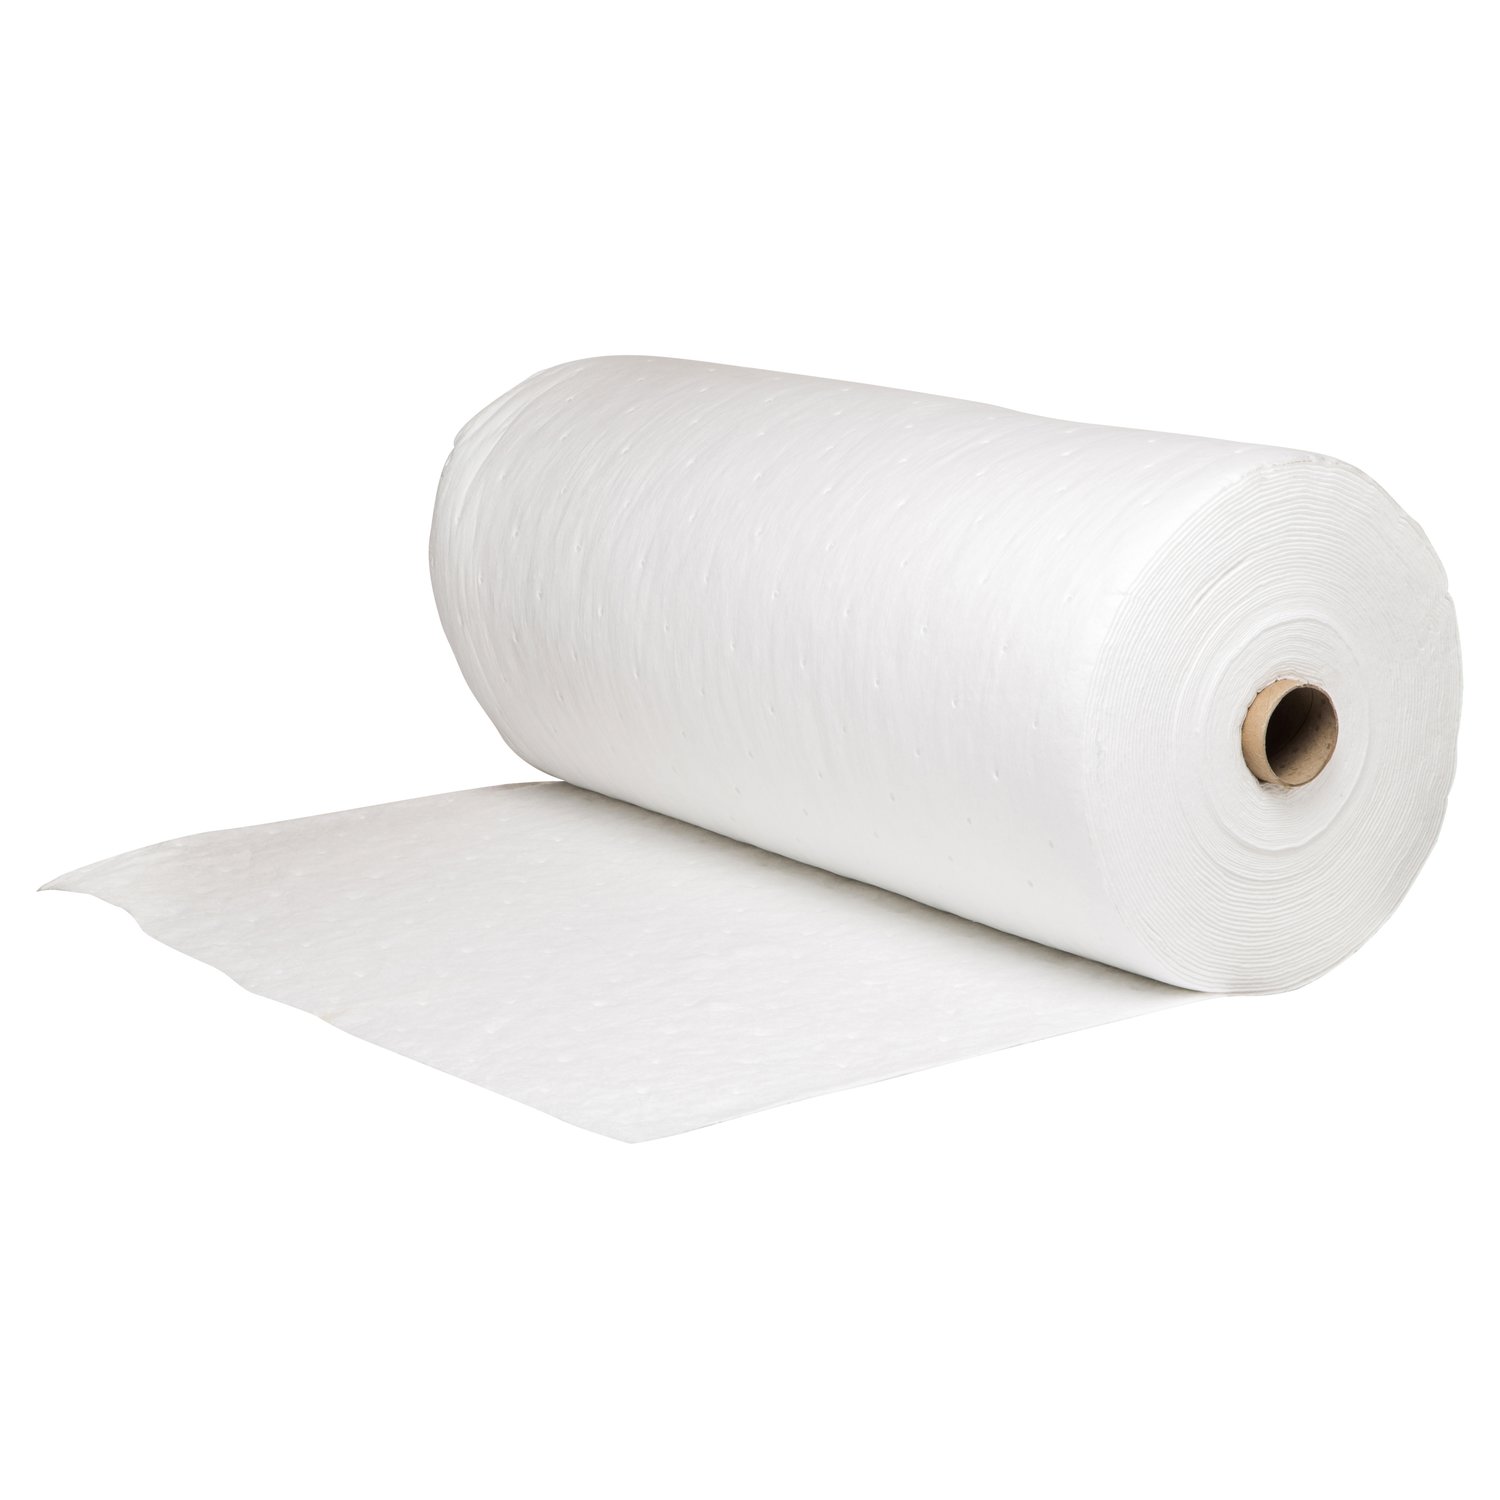 7010383501 - 3M Petroleum Sorbent Static Resistant Roll HP-500, High Capacity, 1
Each/Case